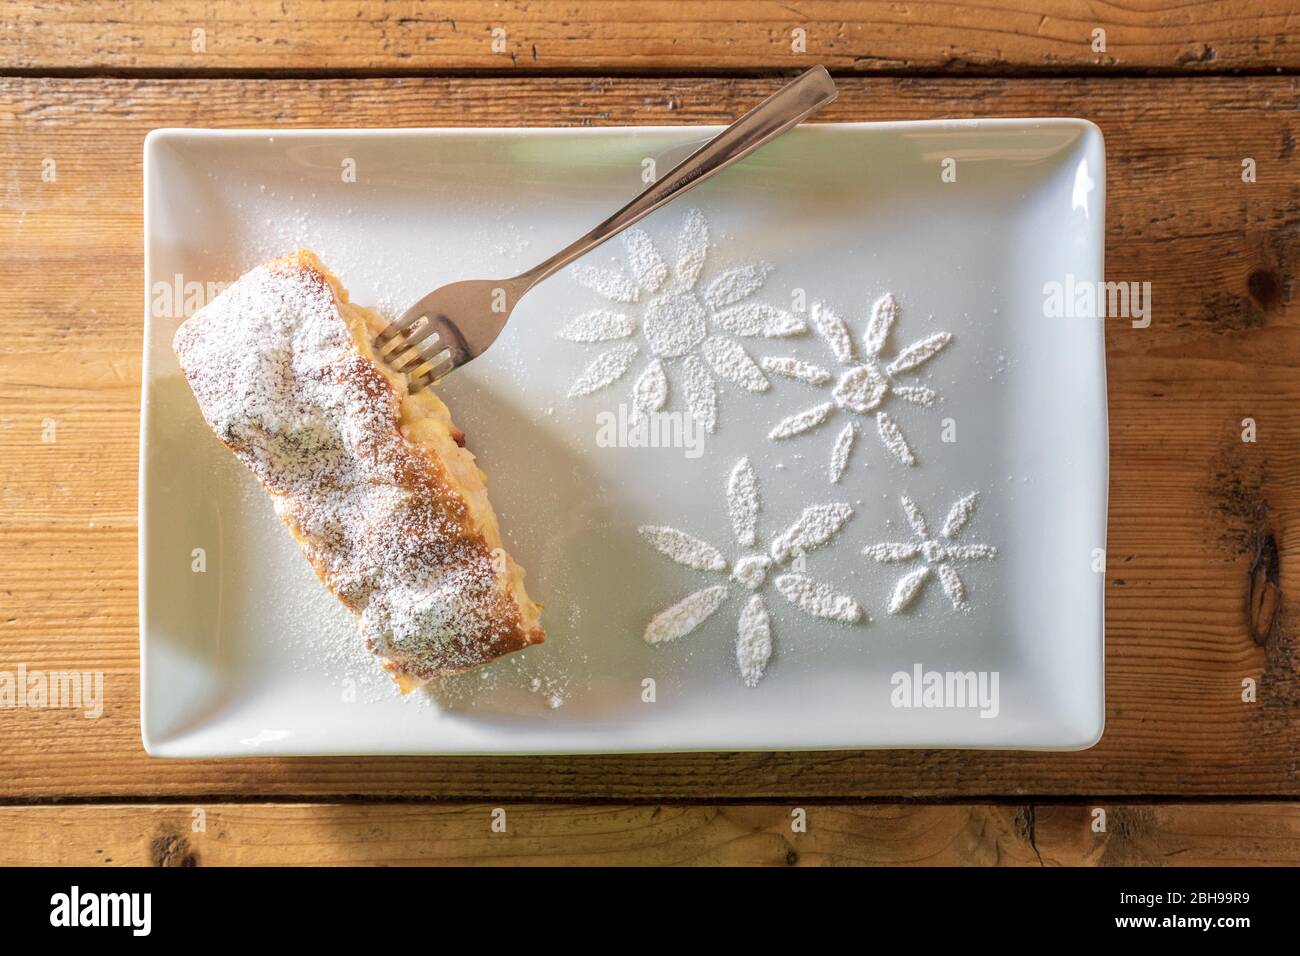 Delicious slice of apple strudel with powdered sugar and sugar decoration on a wooden table, typical dessert of the Dolomites and South Tyrol, Italy Stock Photo